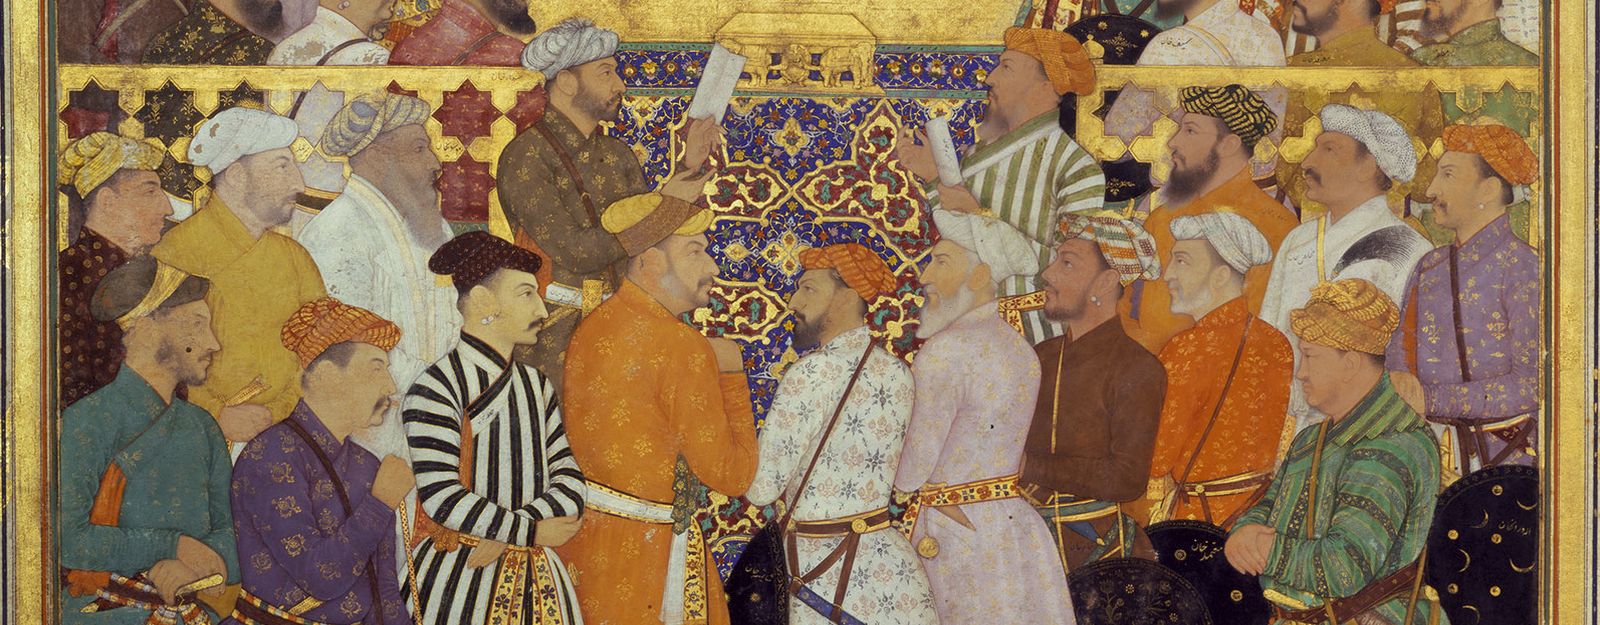 Image from 'Book of Emperors' showing group of men in brightly coloured robes.